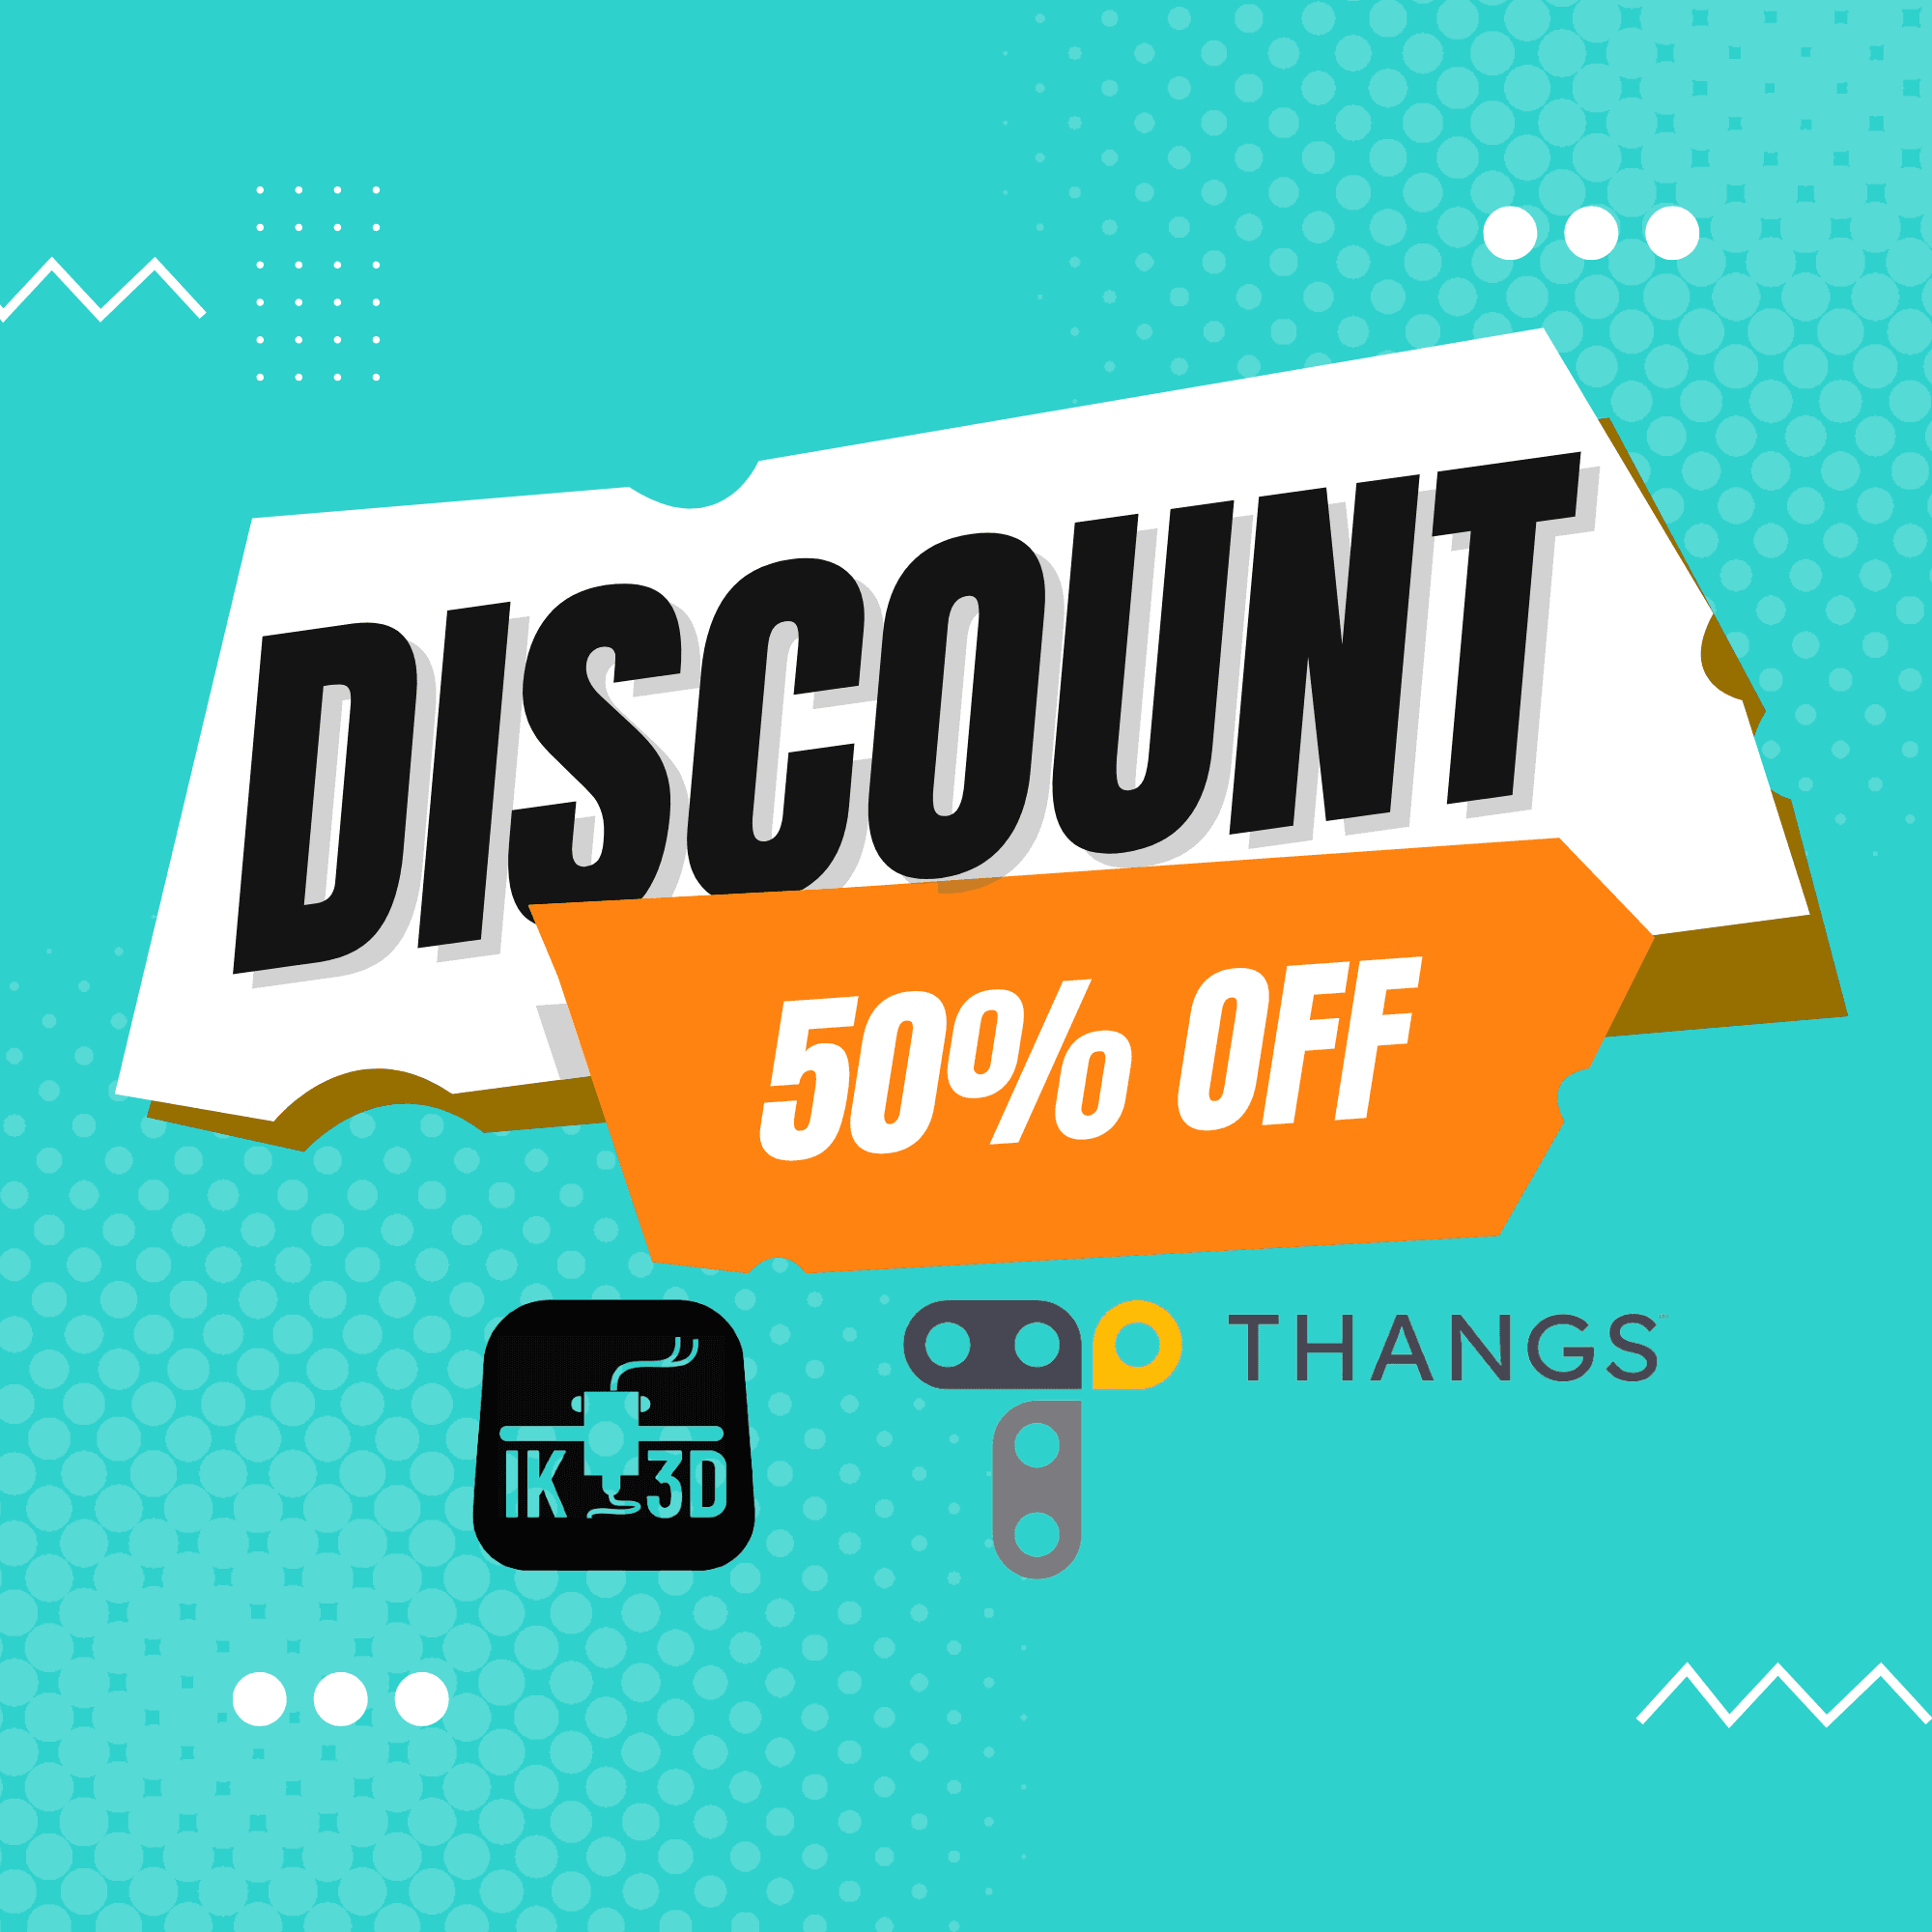 Special discount! 50% Off for a limited time!